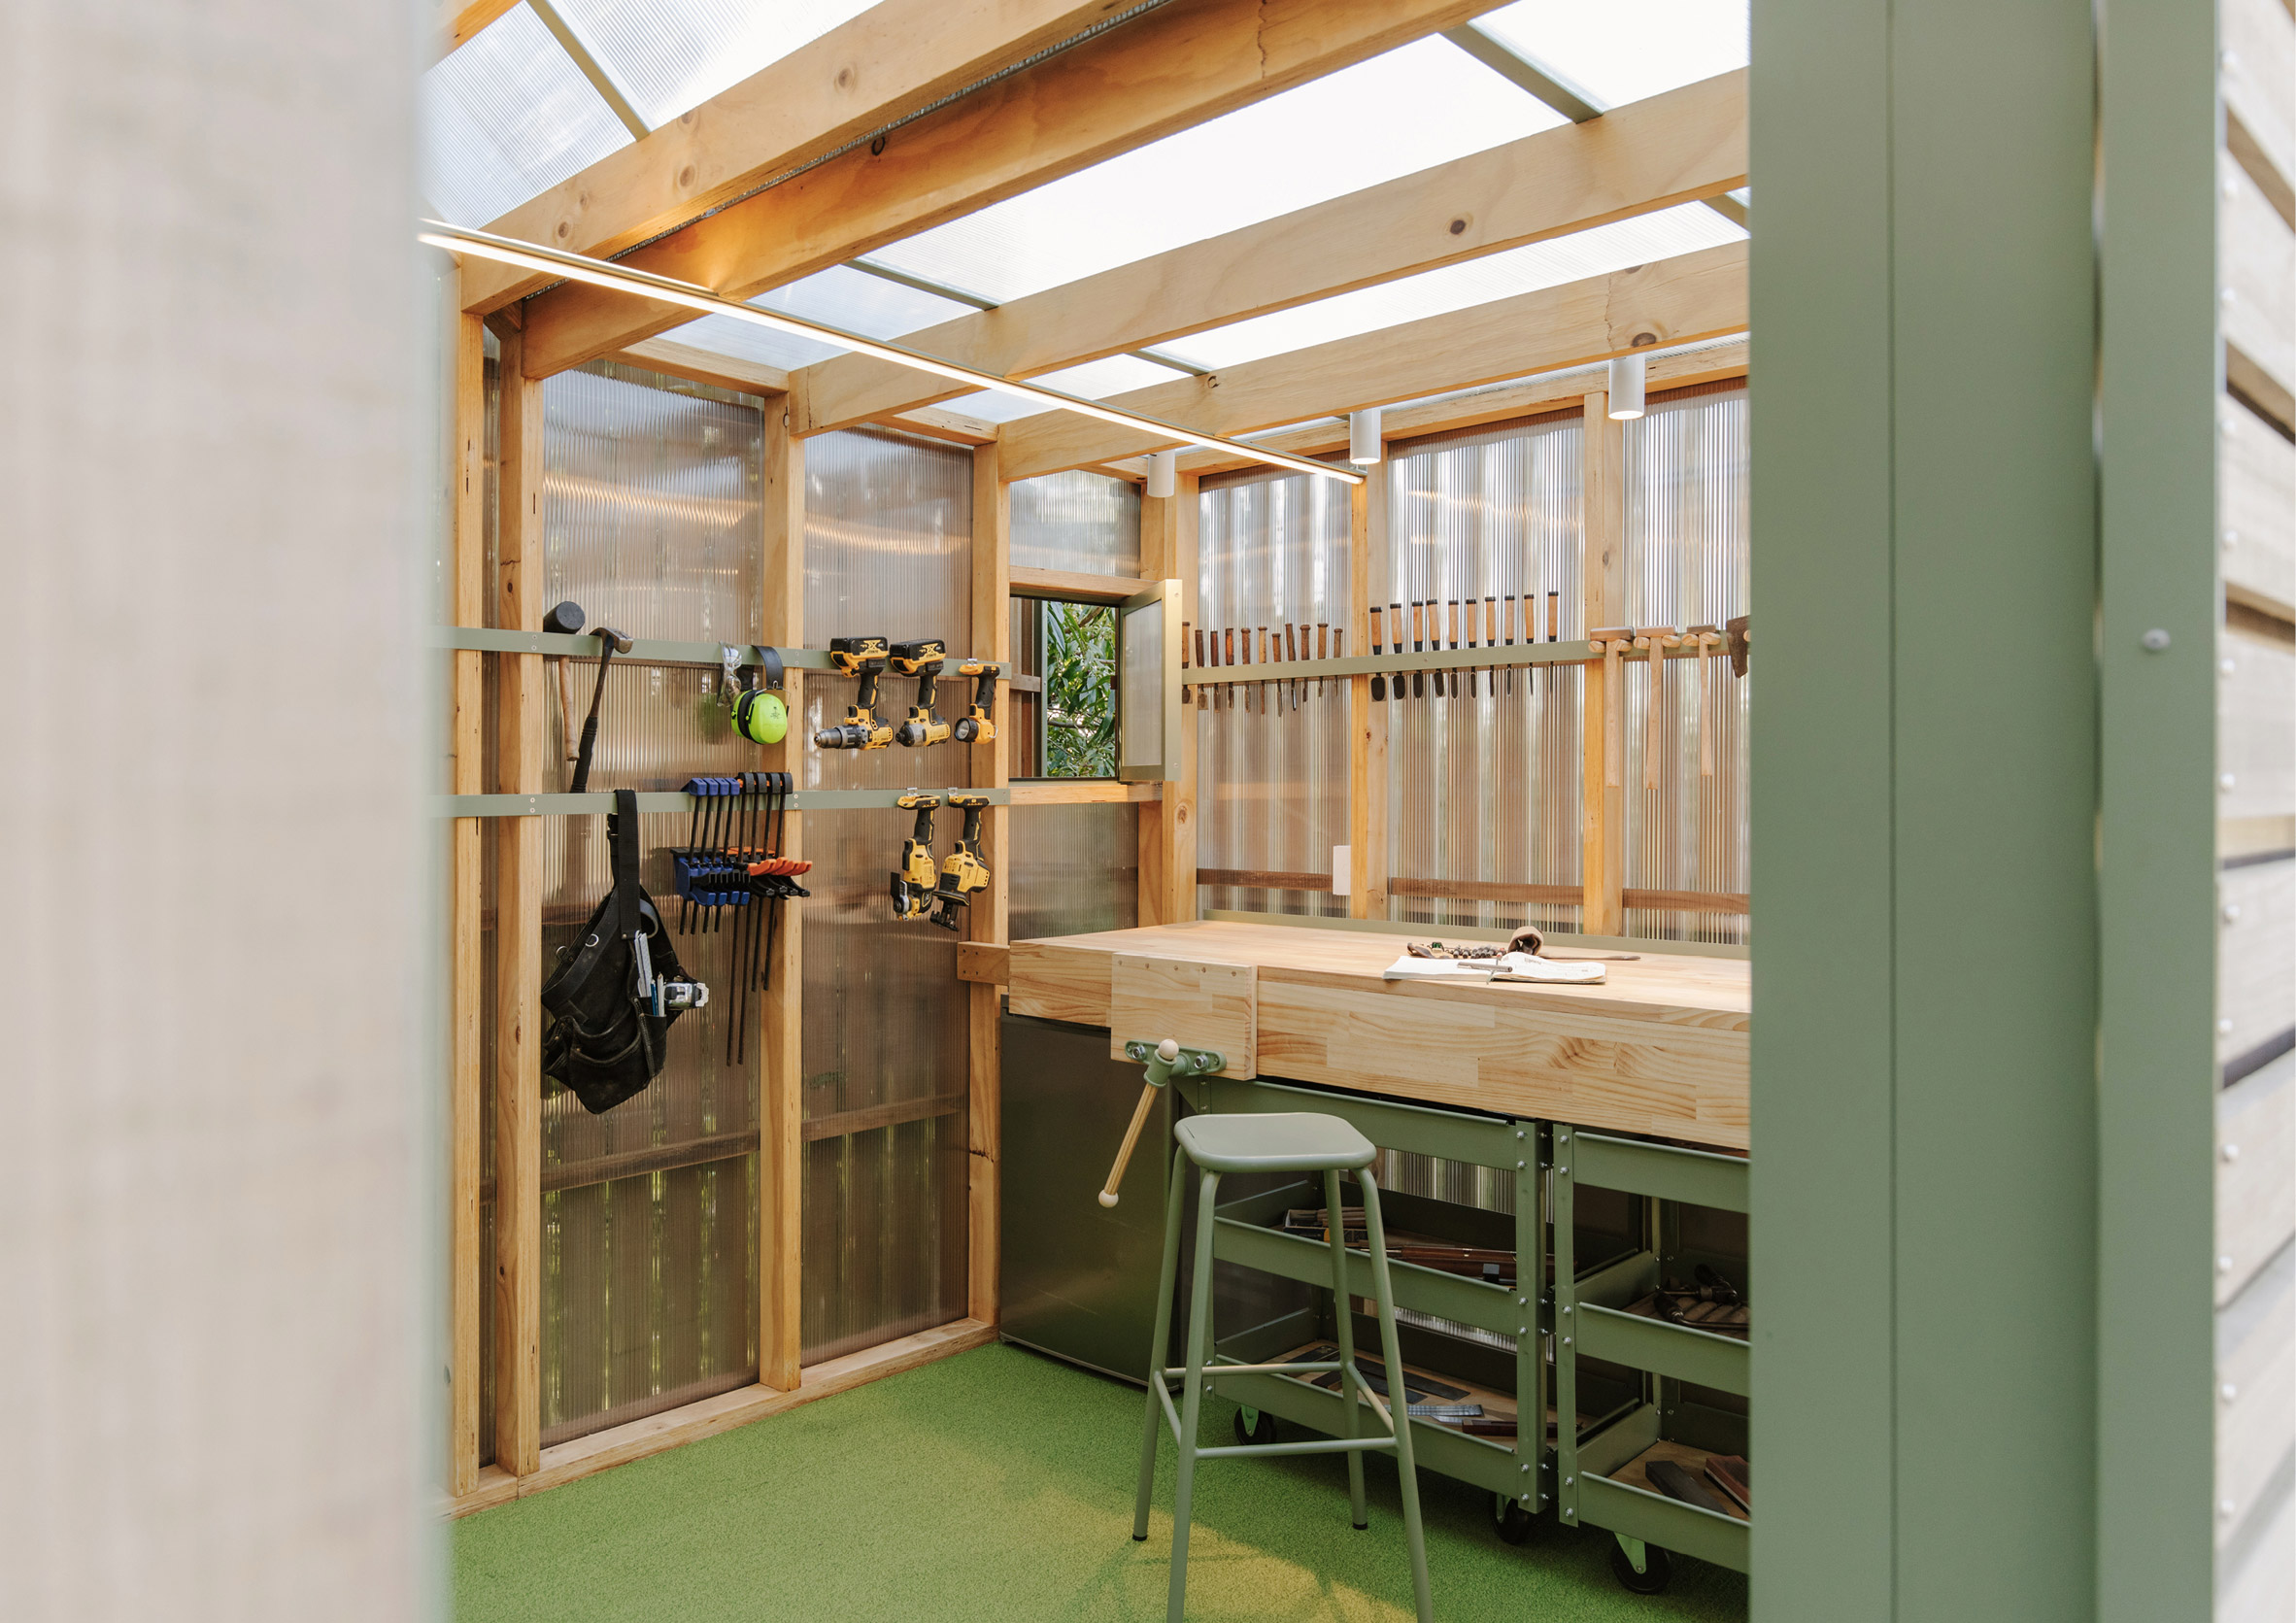 Interior of a timber and polycarbonate shed with a wood workbench, green floor, metal stool and storage